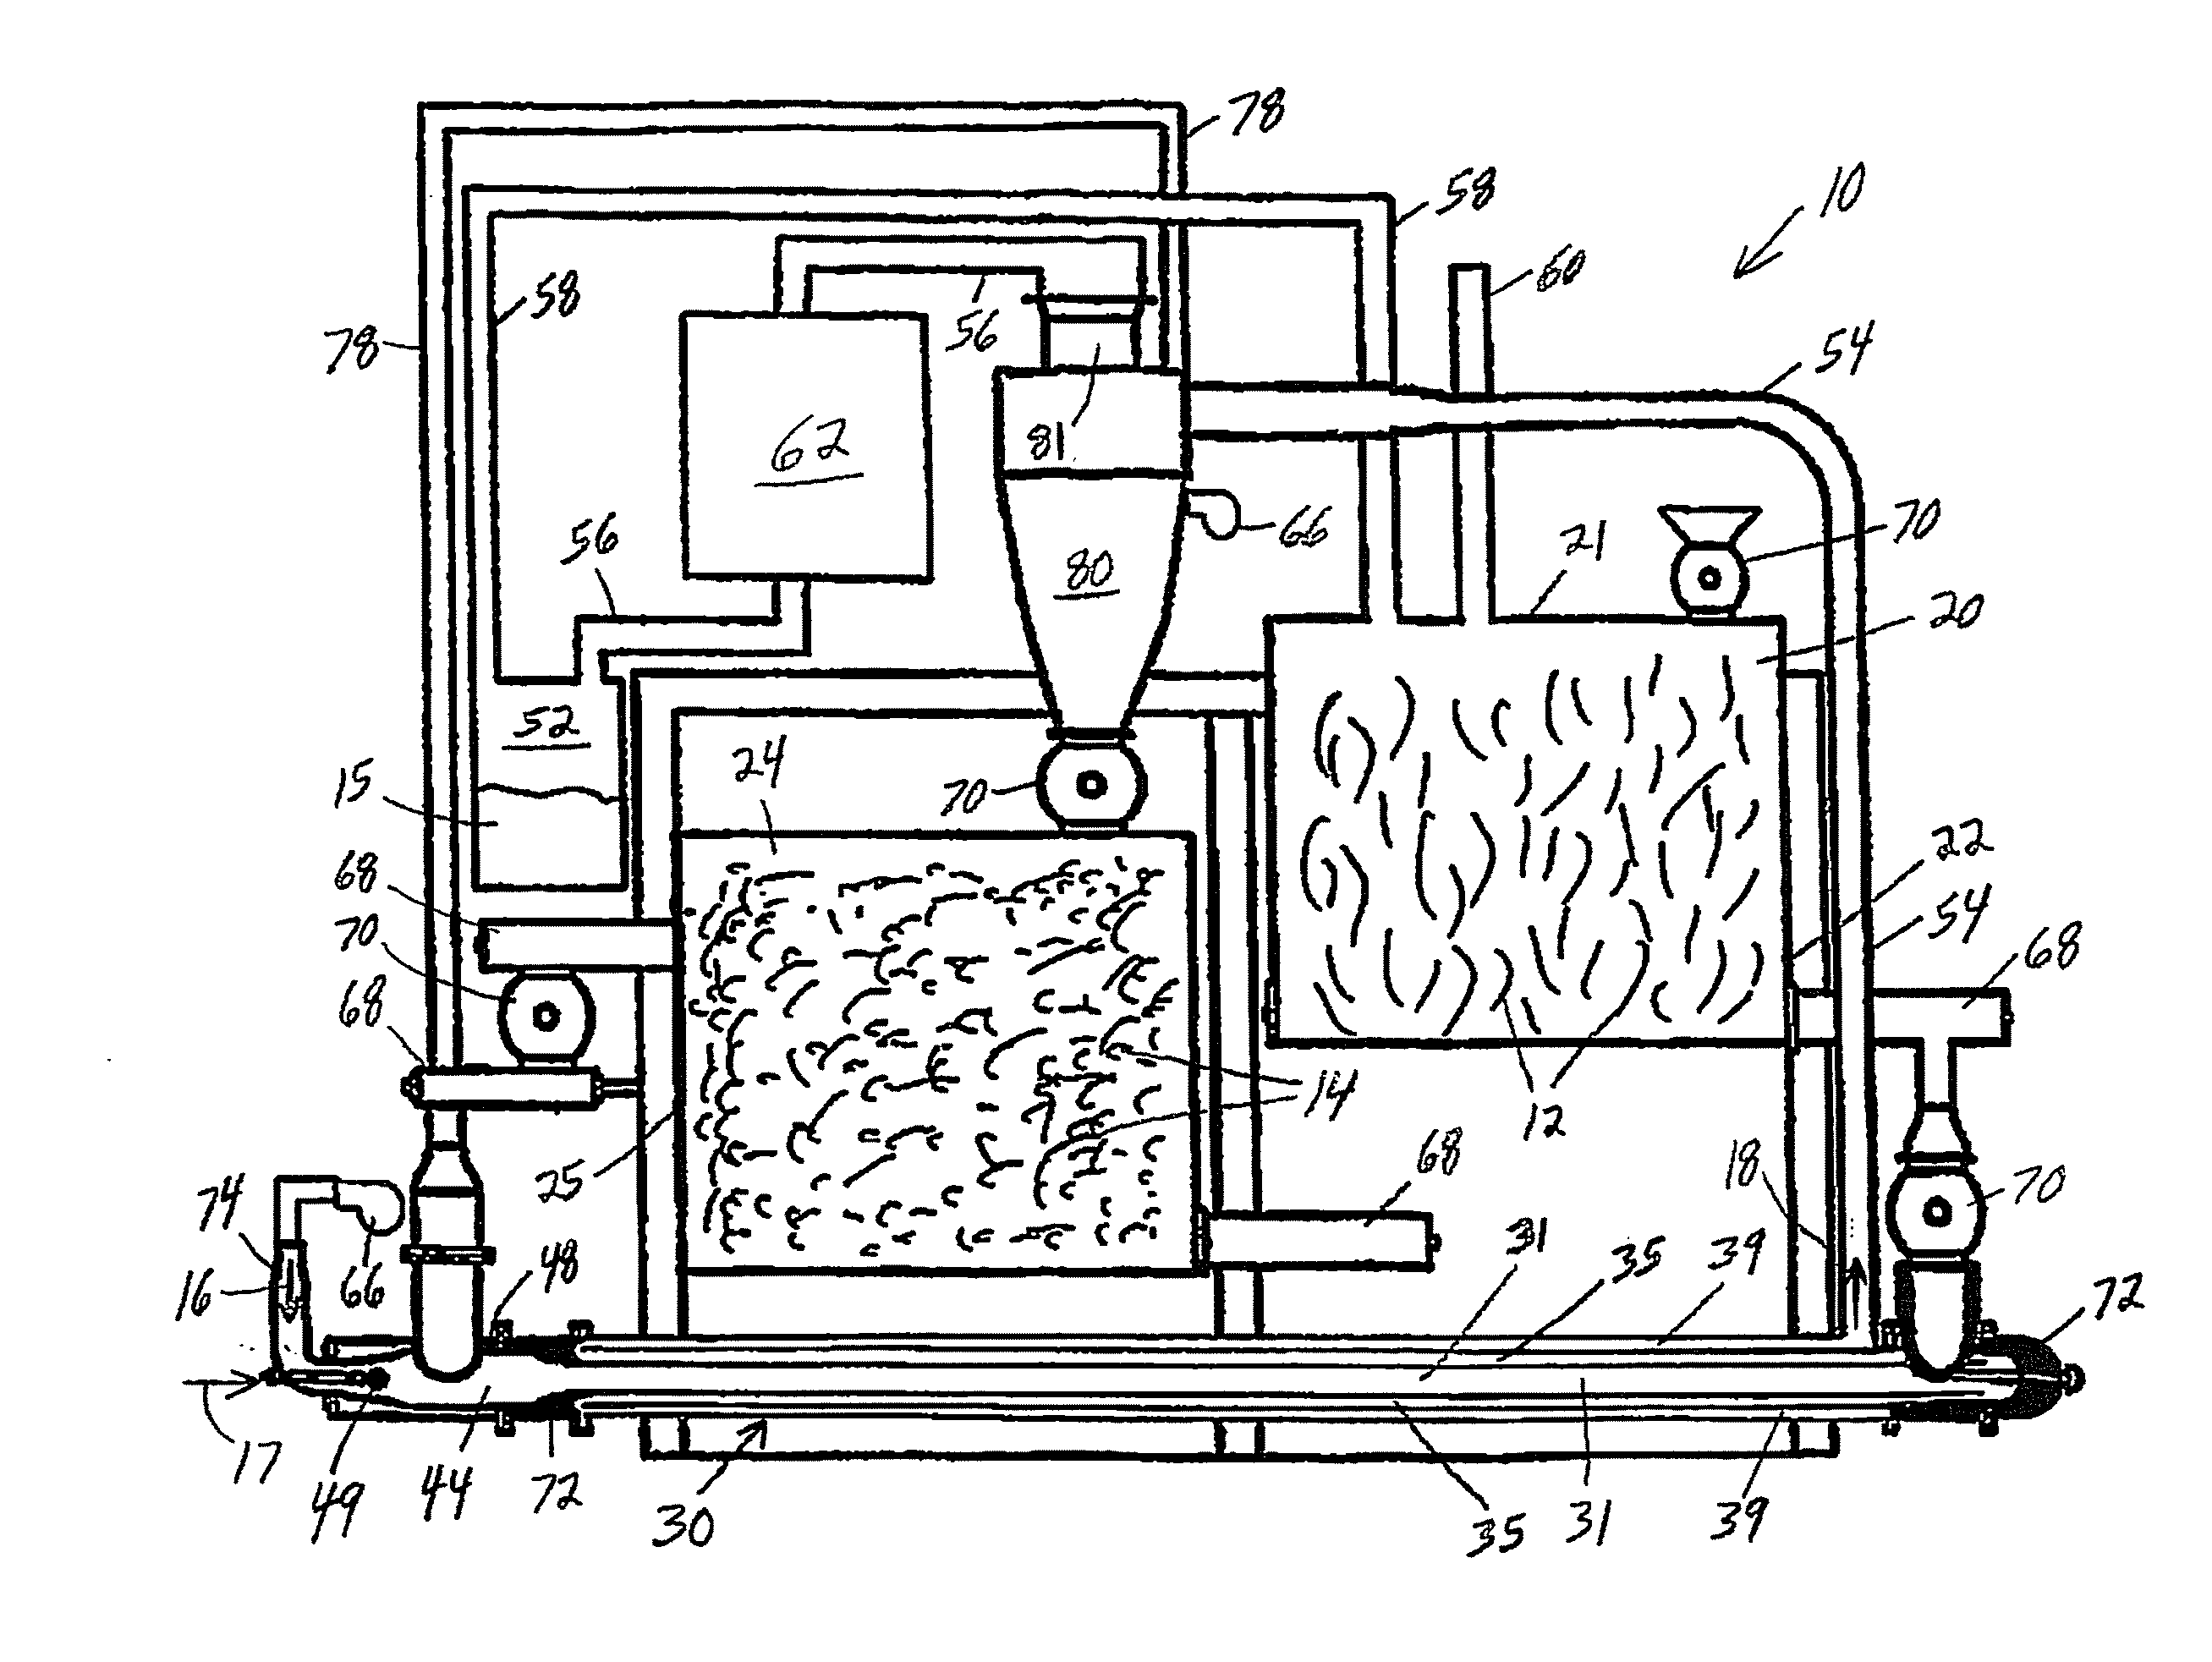 Apparatus, System, and Method for Producing Bio-Fuel Utilizing Concentric-Chambered Pyrolysis